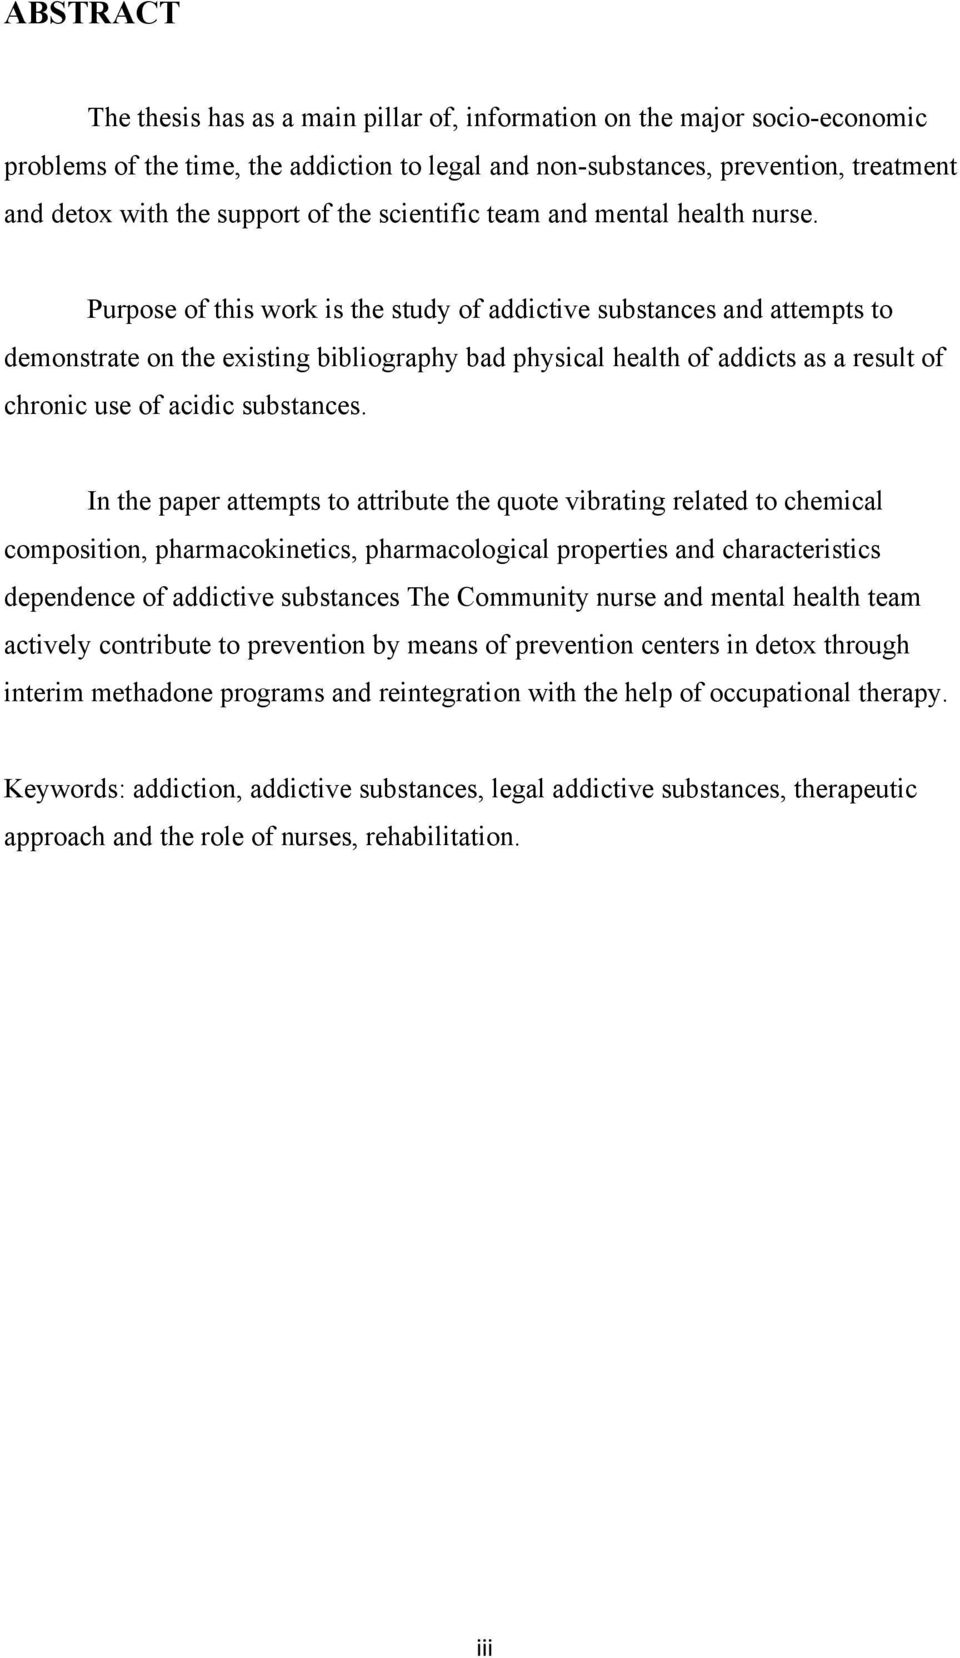 Purpose of this work is the study of addictive substances and attempts to demonstrate on the existing bibliography bad physical health of addicts as a result of chronic use of acidic substances.